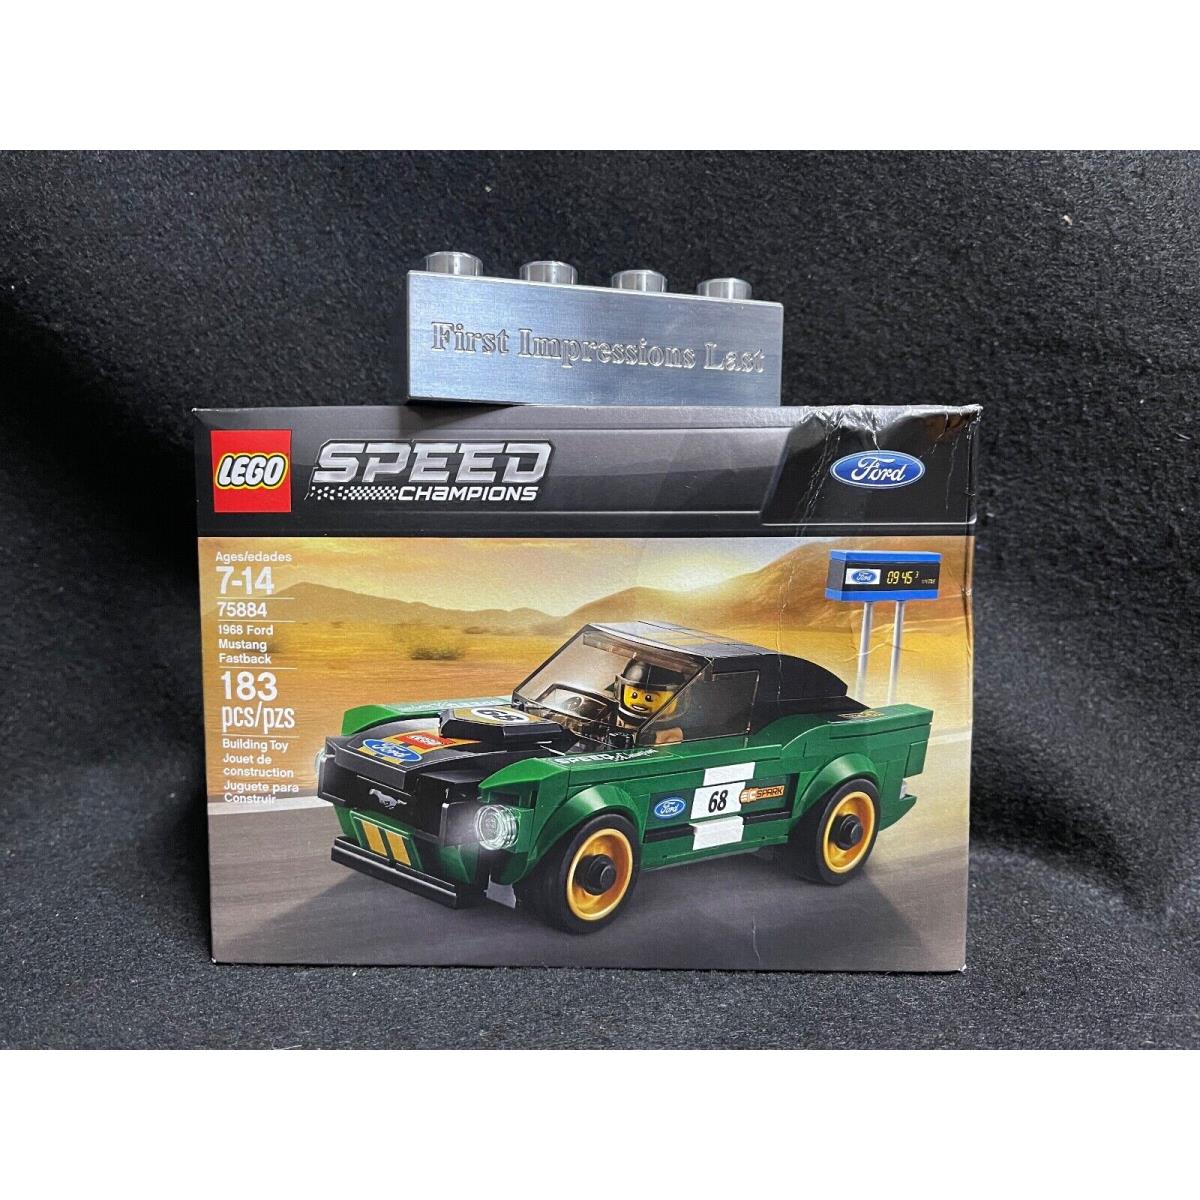 Lego 75884 2018 Speed Champions 1968 Ford Mustang Fastback Retired